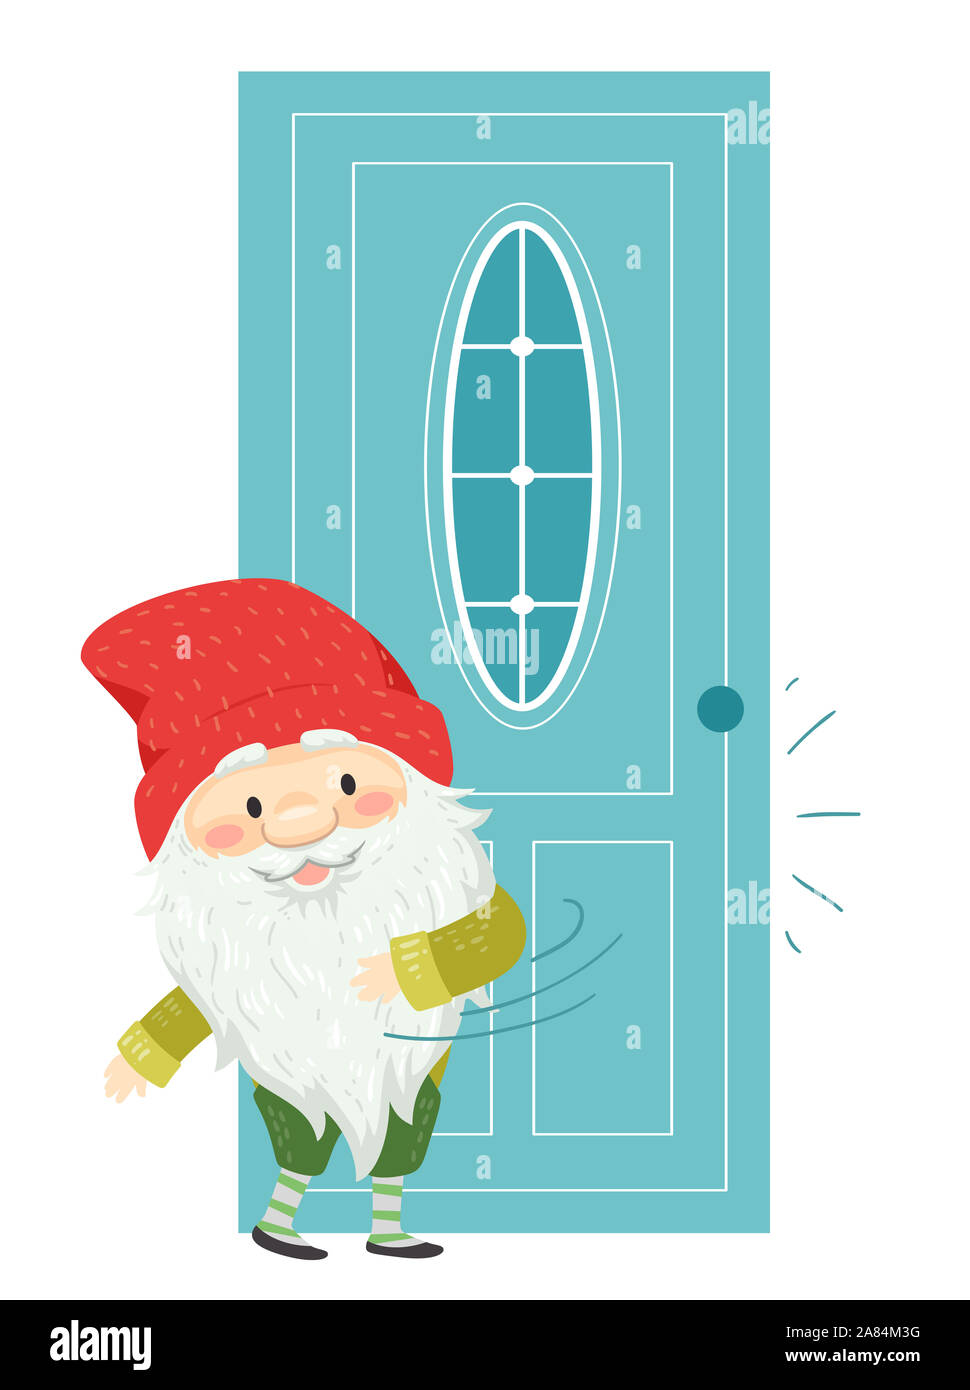 Illustration of Icelandic Yule Lad with Long White Beard and Mustache Wearing Red Bonnet Loudly Slamming Door Shut Stock Photo